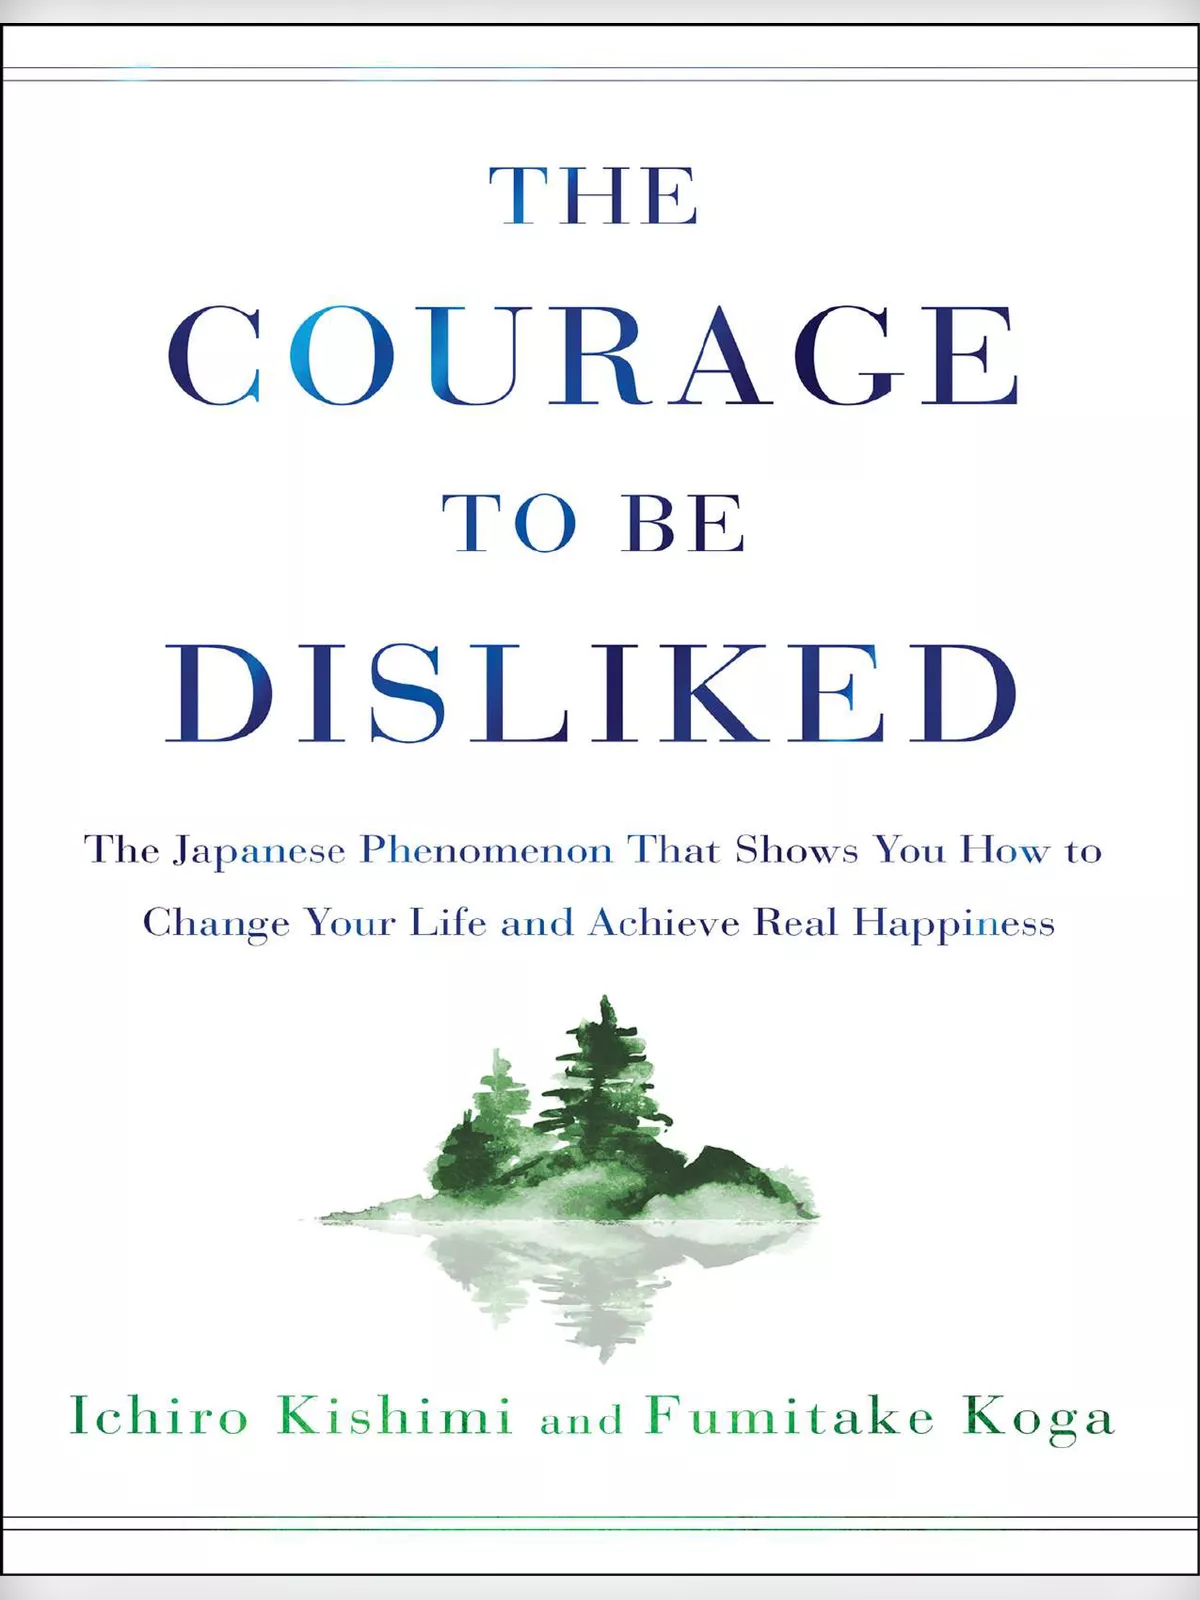 The Courage To Be Disliked